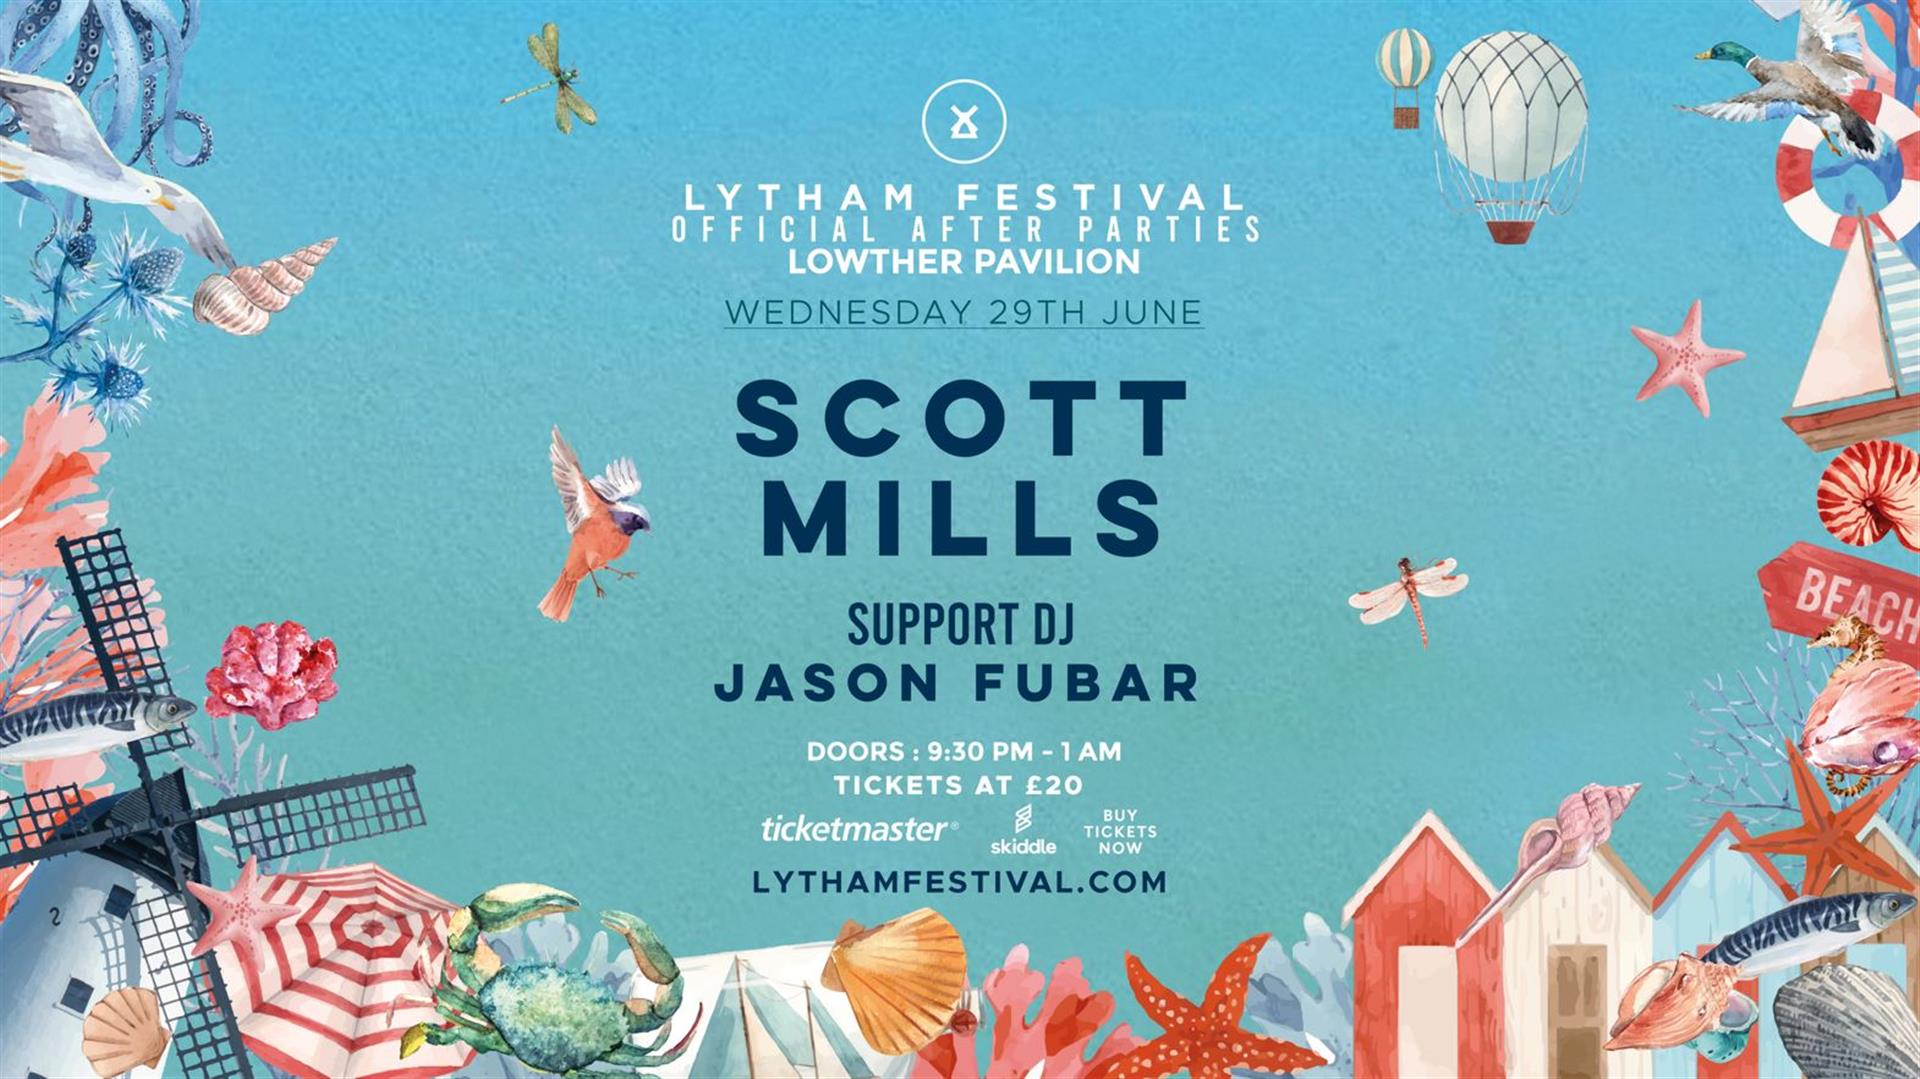 Lytham Festival Official After Parties – Scott Mills - Lowther Pavilion